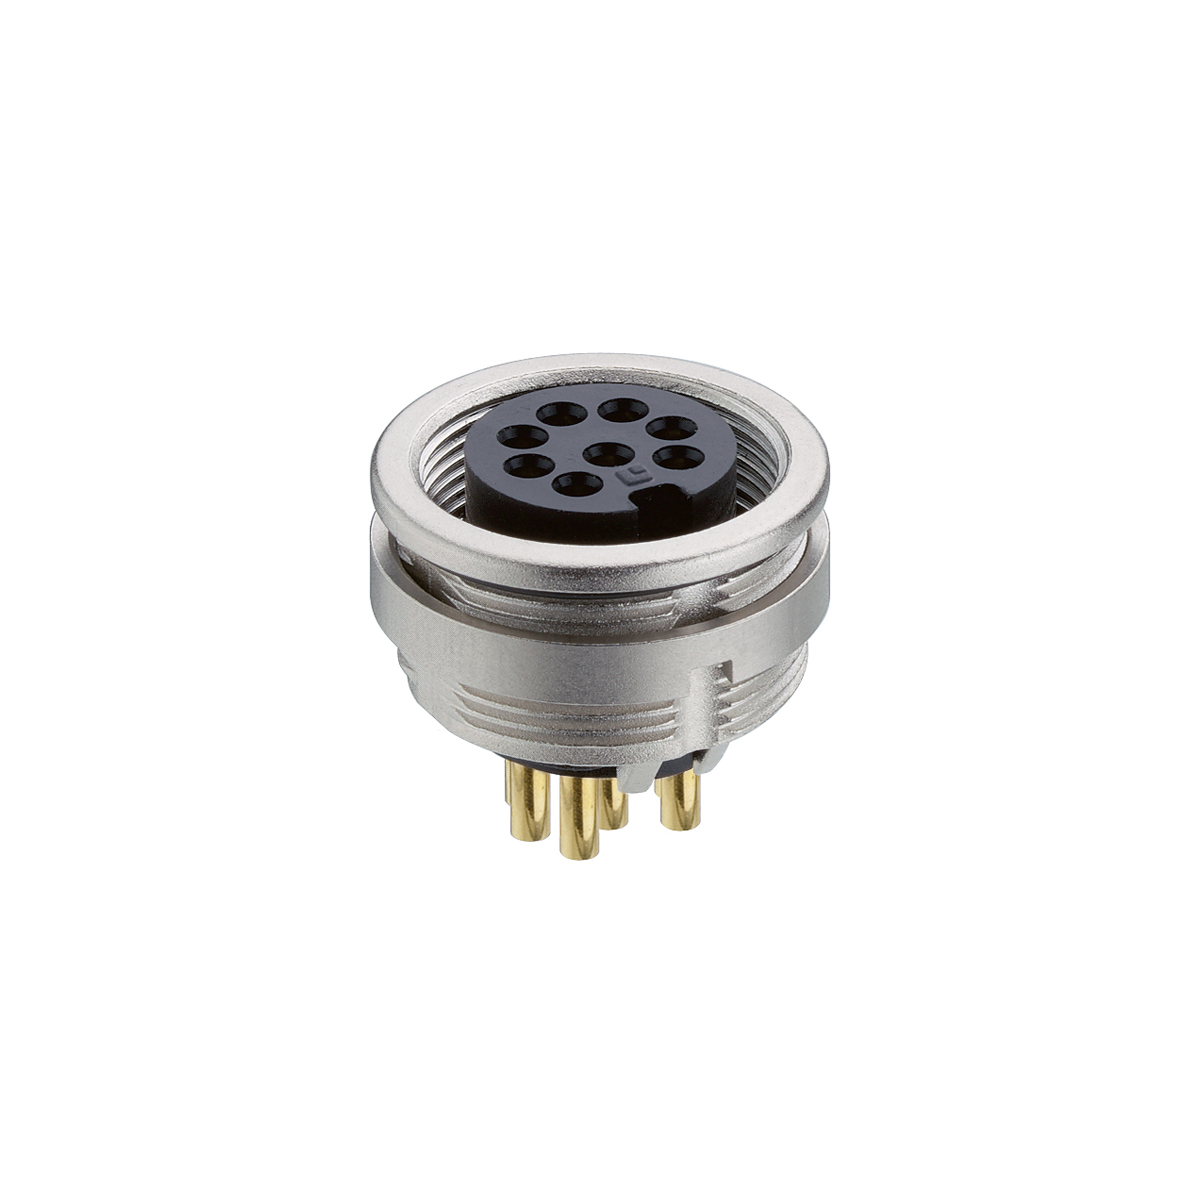 Lumberg: 0304-2 (Series 03 | Circular connectors with threaded joint M16 acc. to IEC 61076-2-106, IP40/IP68)